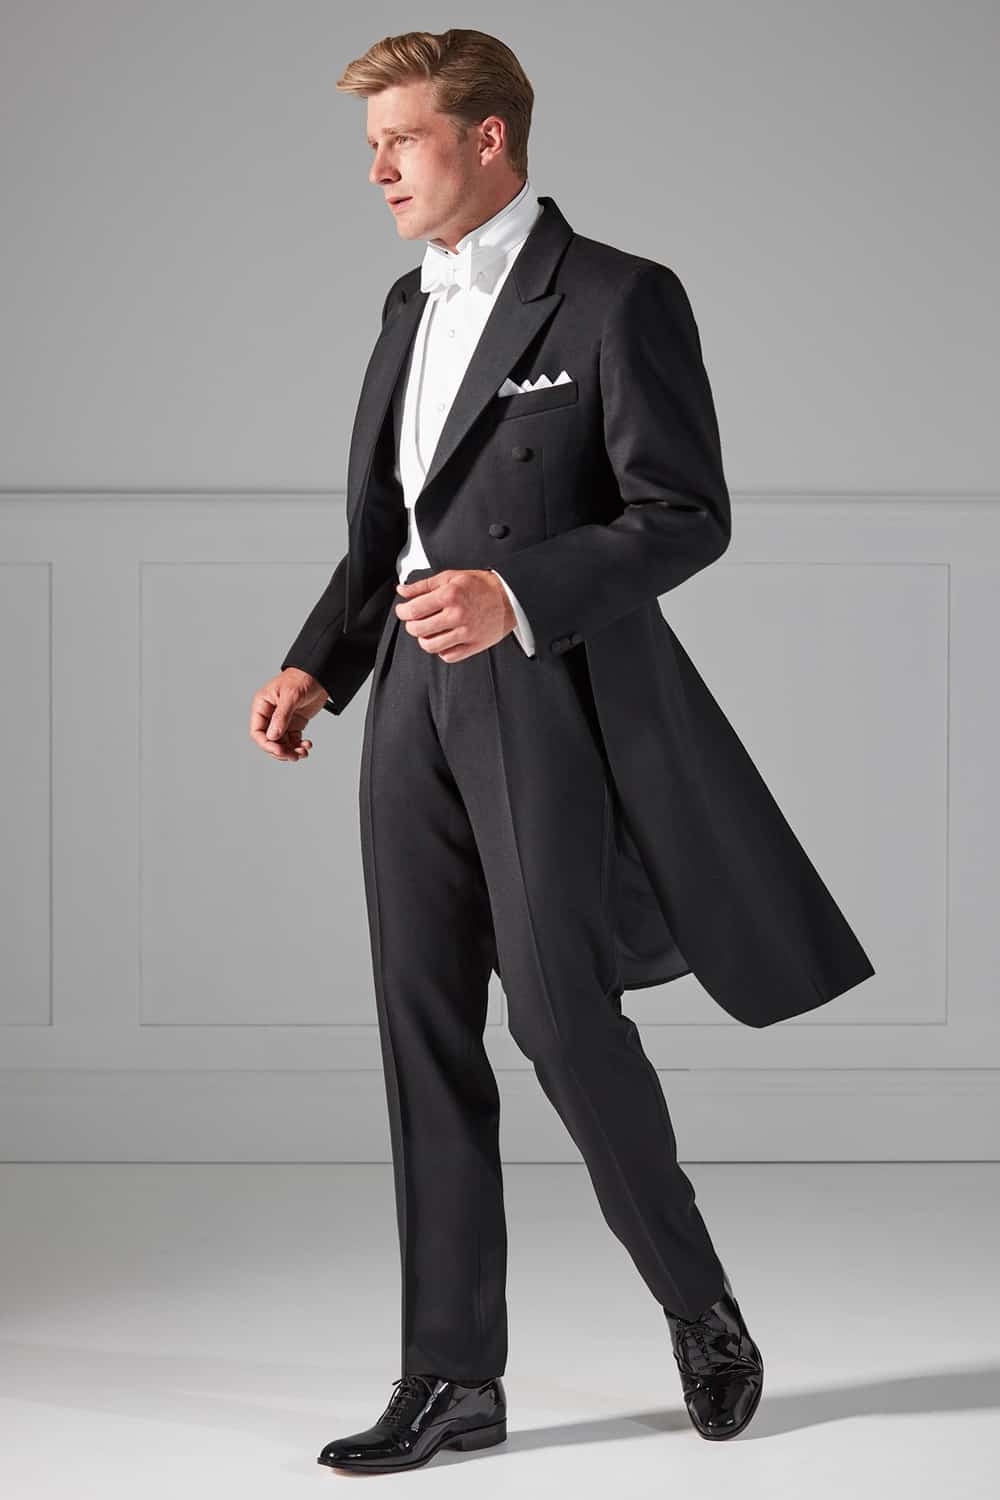 White Tie Wedding Guest Men Outfit 4 